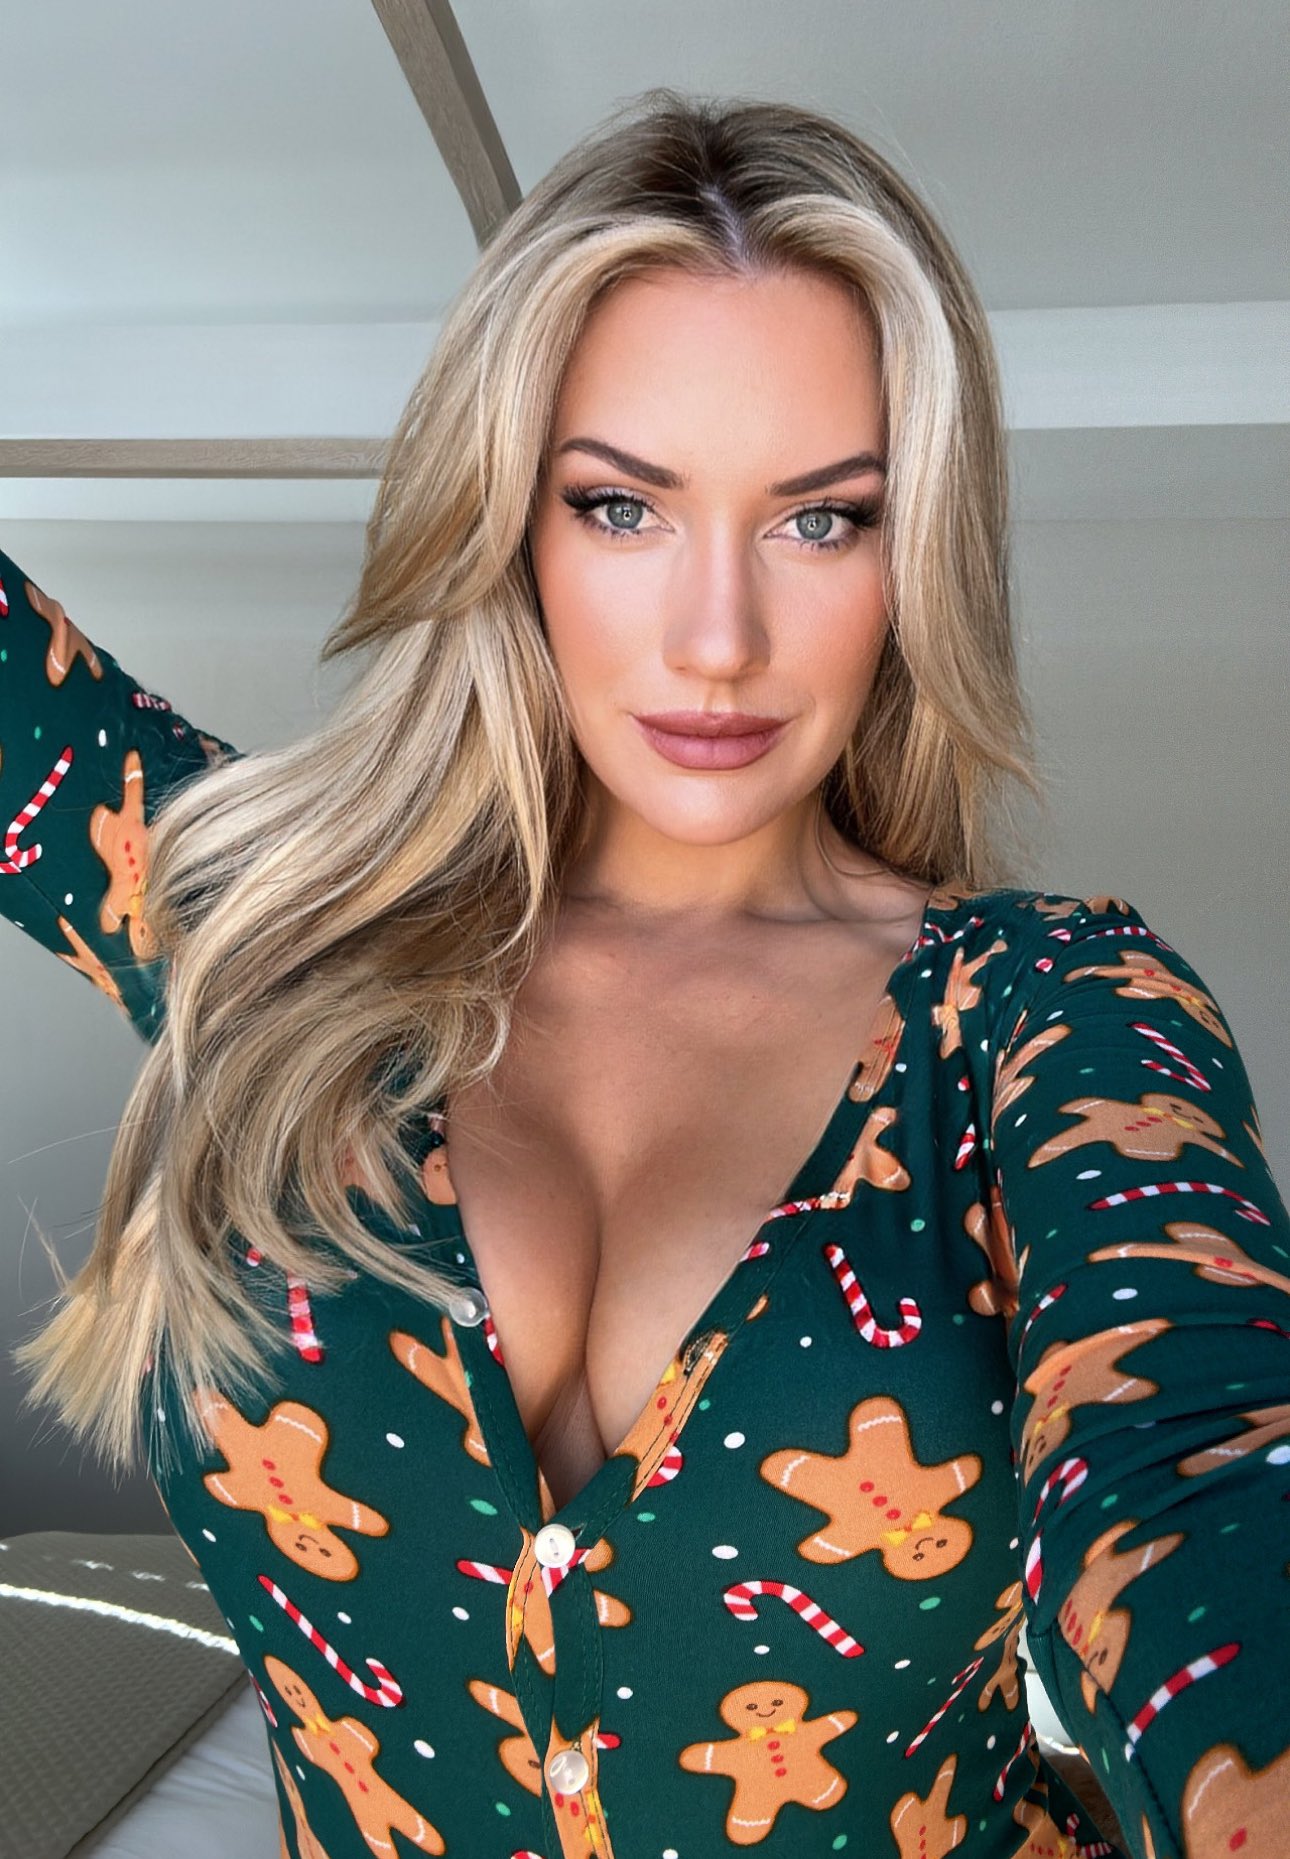 , Golf beauty Paige Spiranac poses in lingerie as she releases raunchy ‘naughty place’ towel sending fans wild